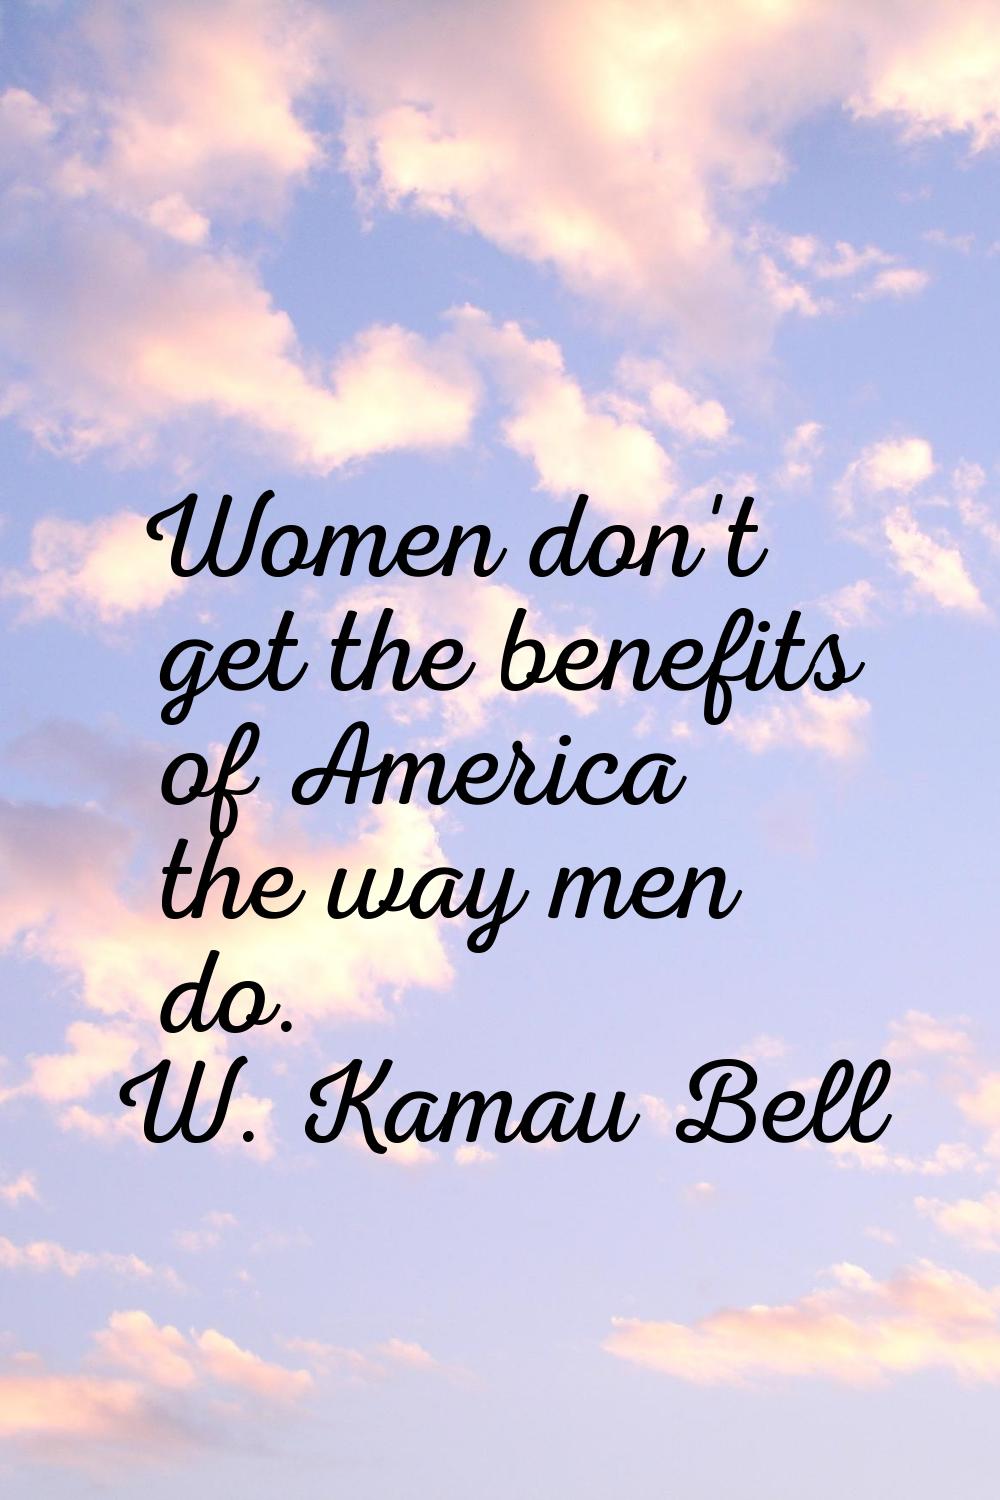 Women don't get the benefits of America the way men do.